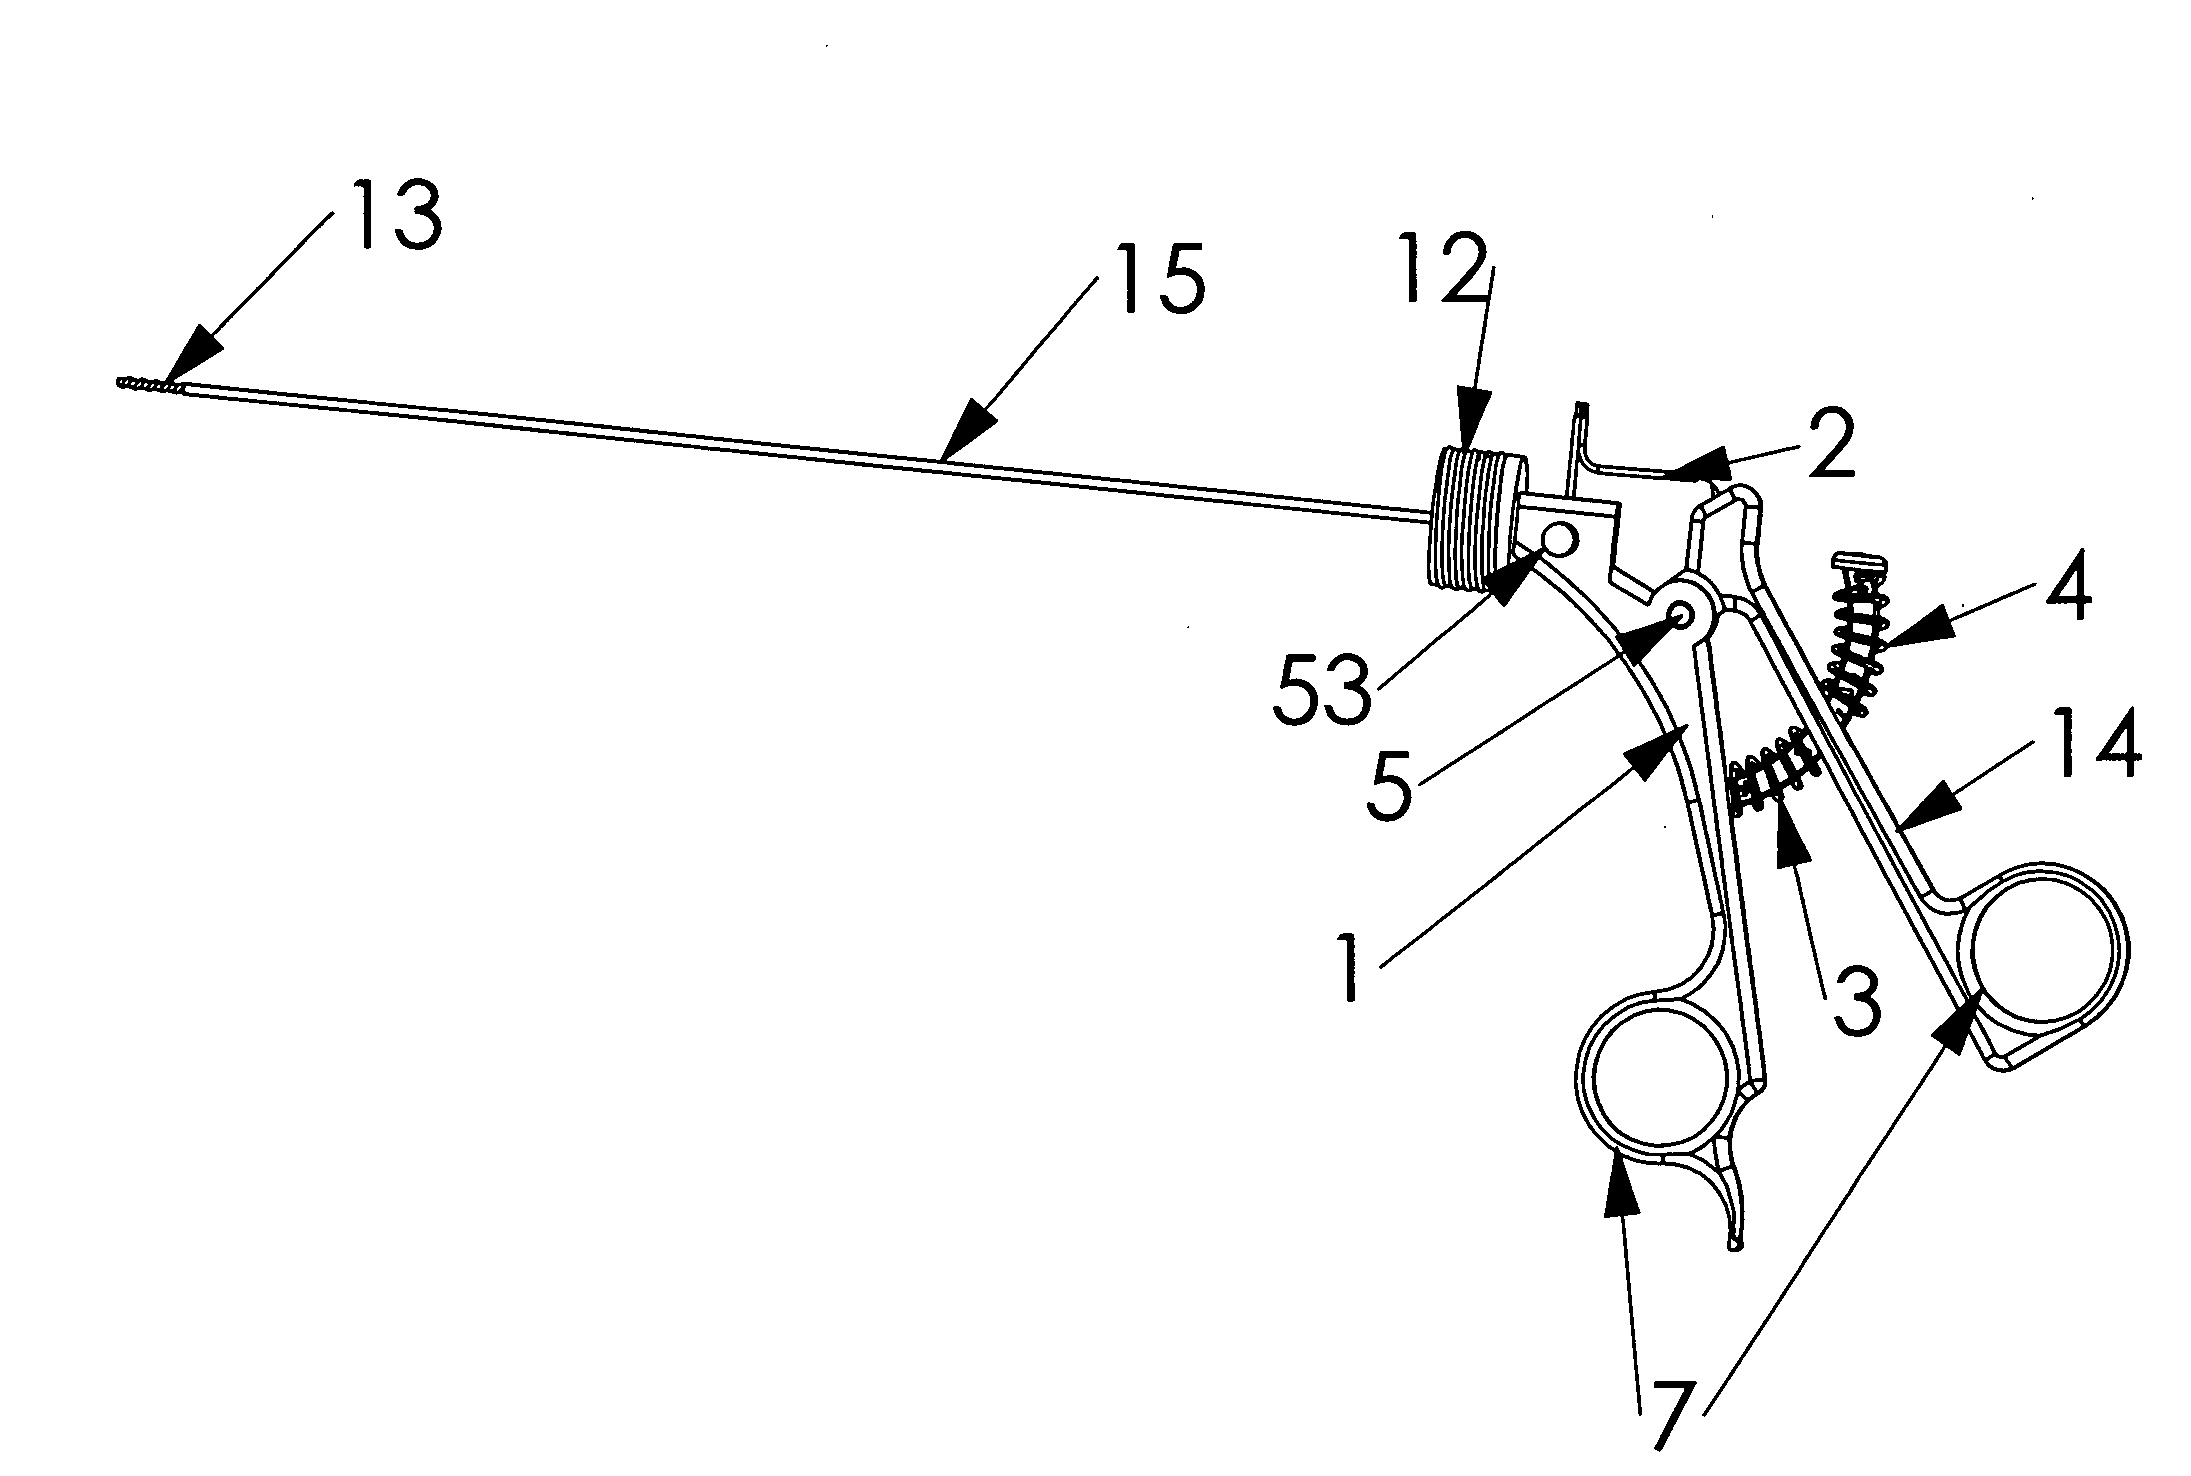 Multi-Purpose Minimally Invasive Instrument That Uses a Micro Entry Port